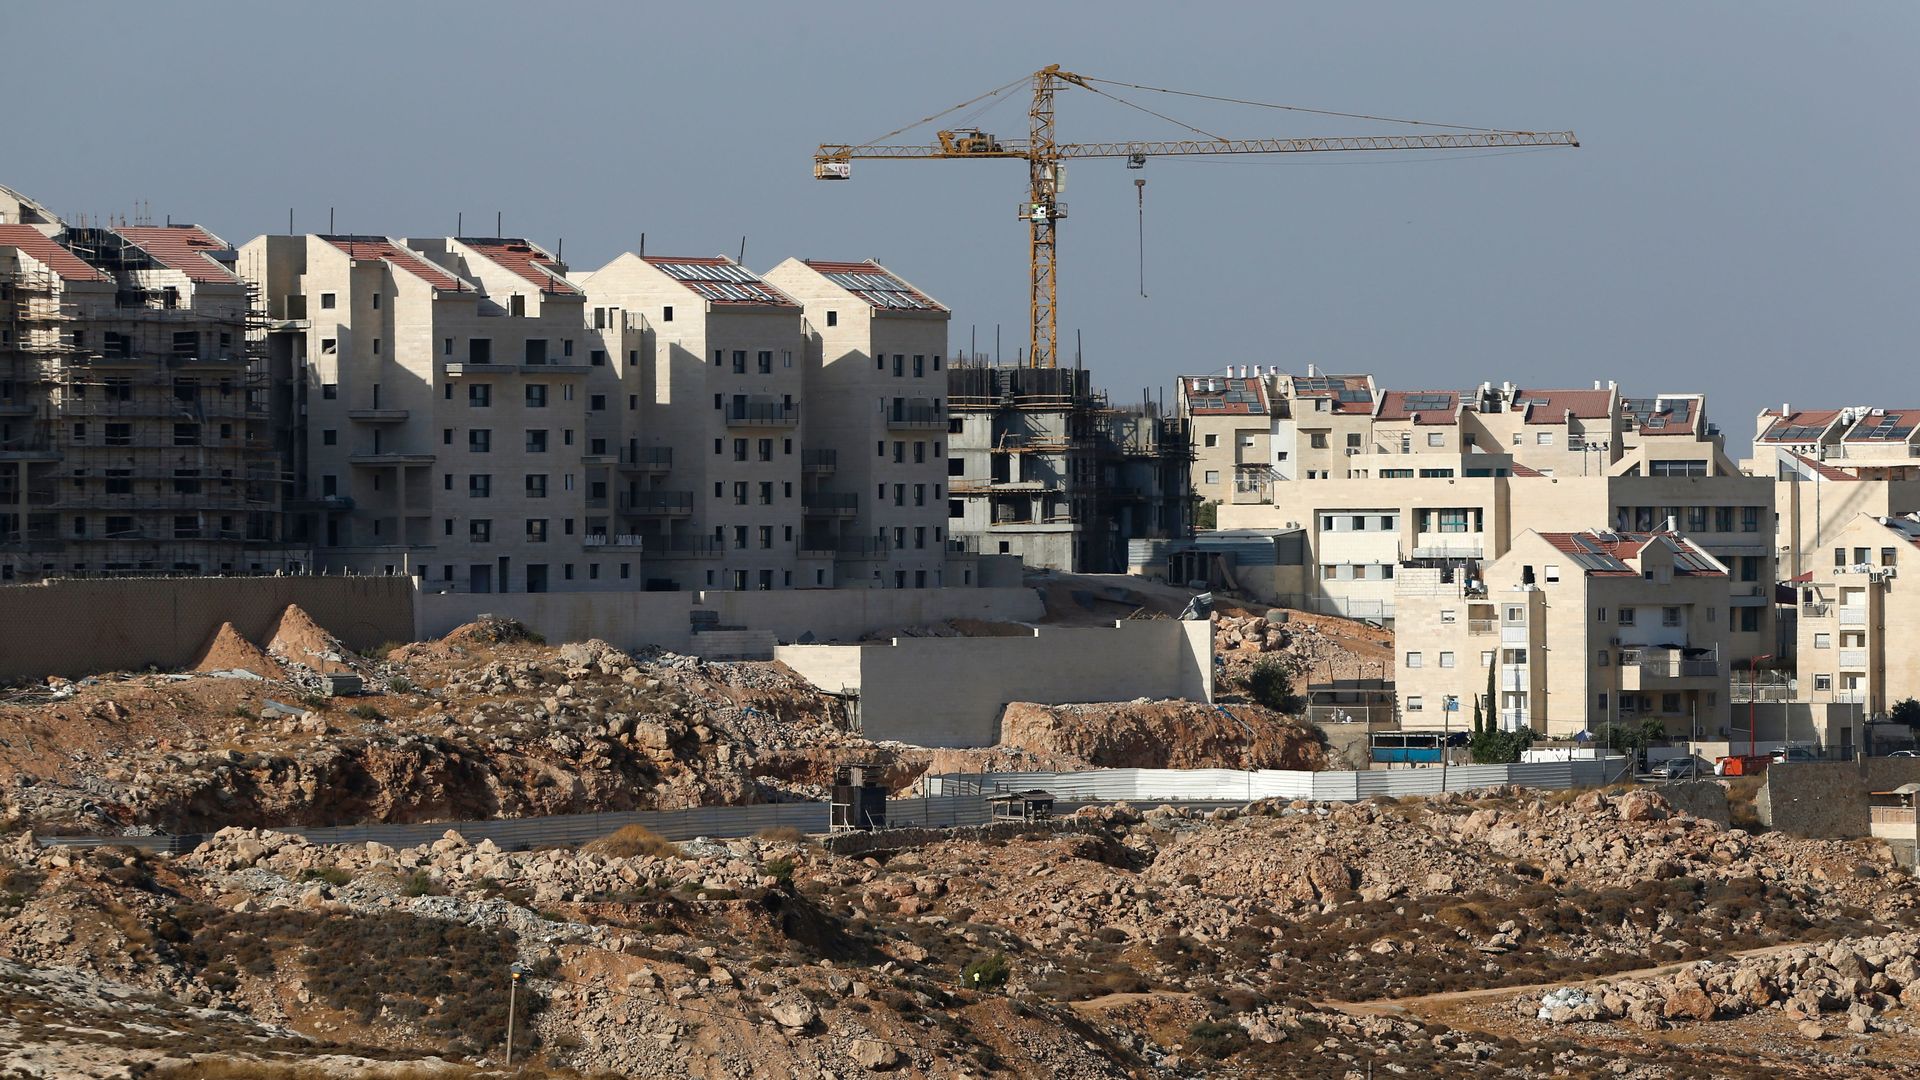 A general view of the Israeli settlement Kokhav Yaakov in the occupied West Bank in 2017. Photo: Abbas Momani/AFP via Getty Images